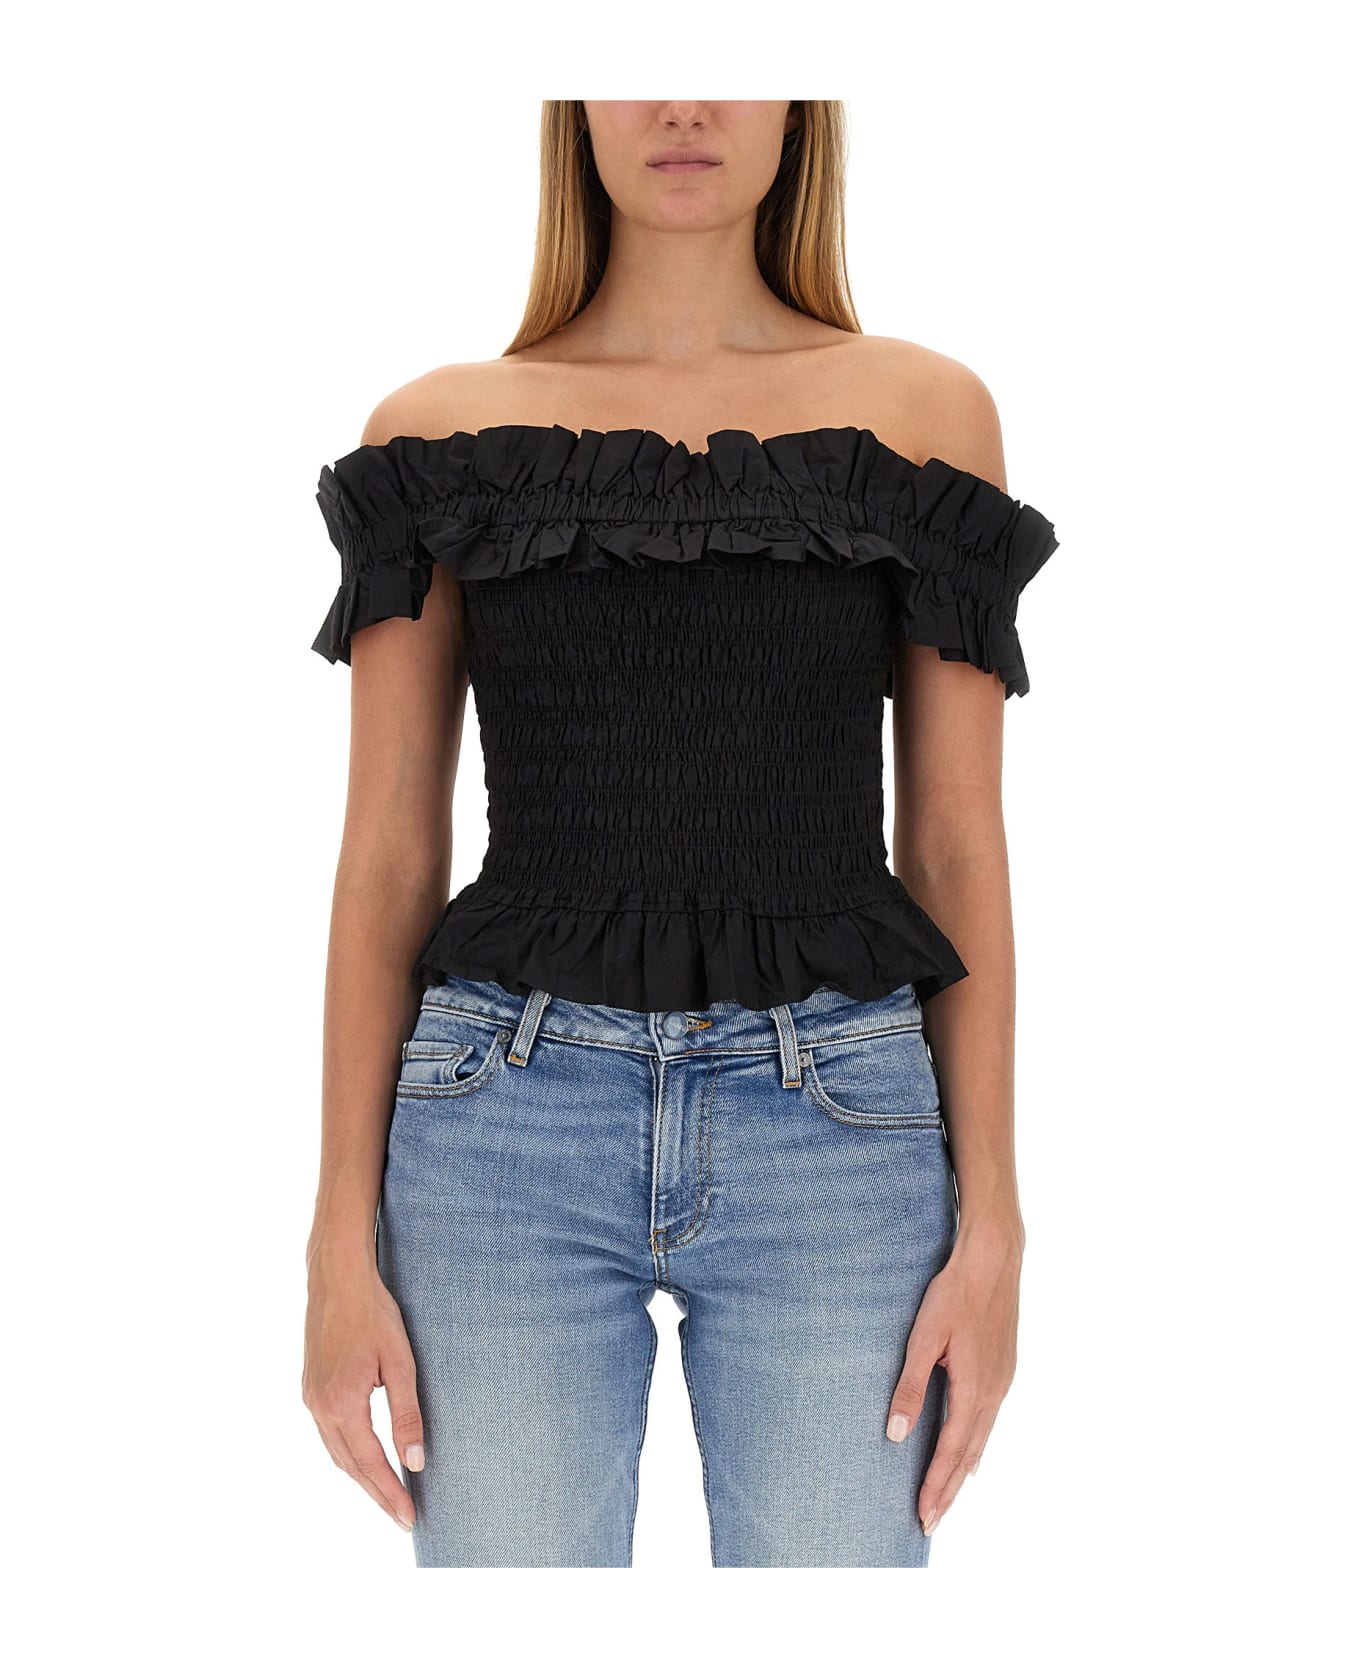 Ganni Top With Bare Shoulders - Black タンクトップ